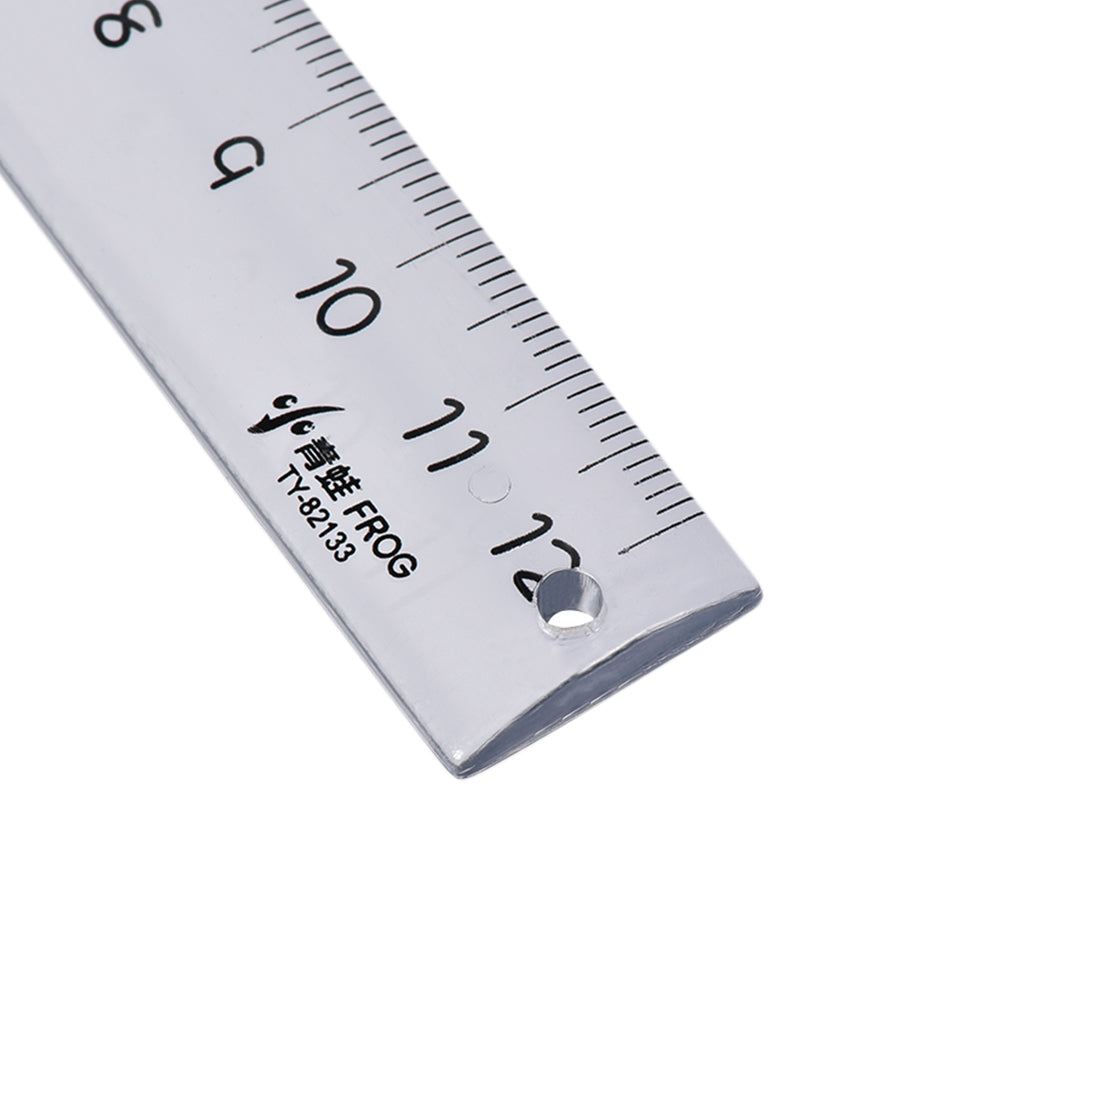 uxcell Uxcell Straight Ruler 12cm Metric Plastic Measuring Tool Clear 2pcs